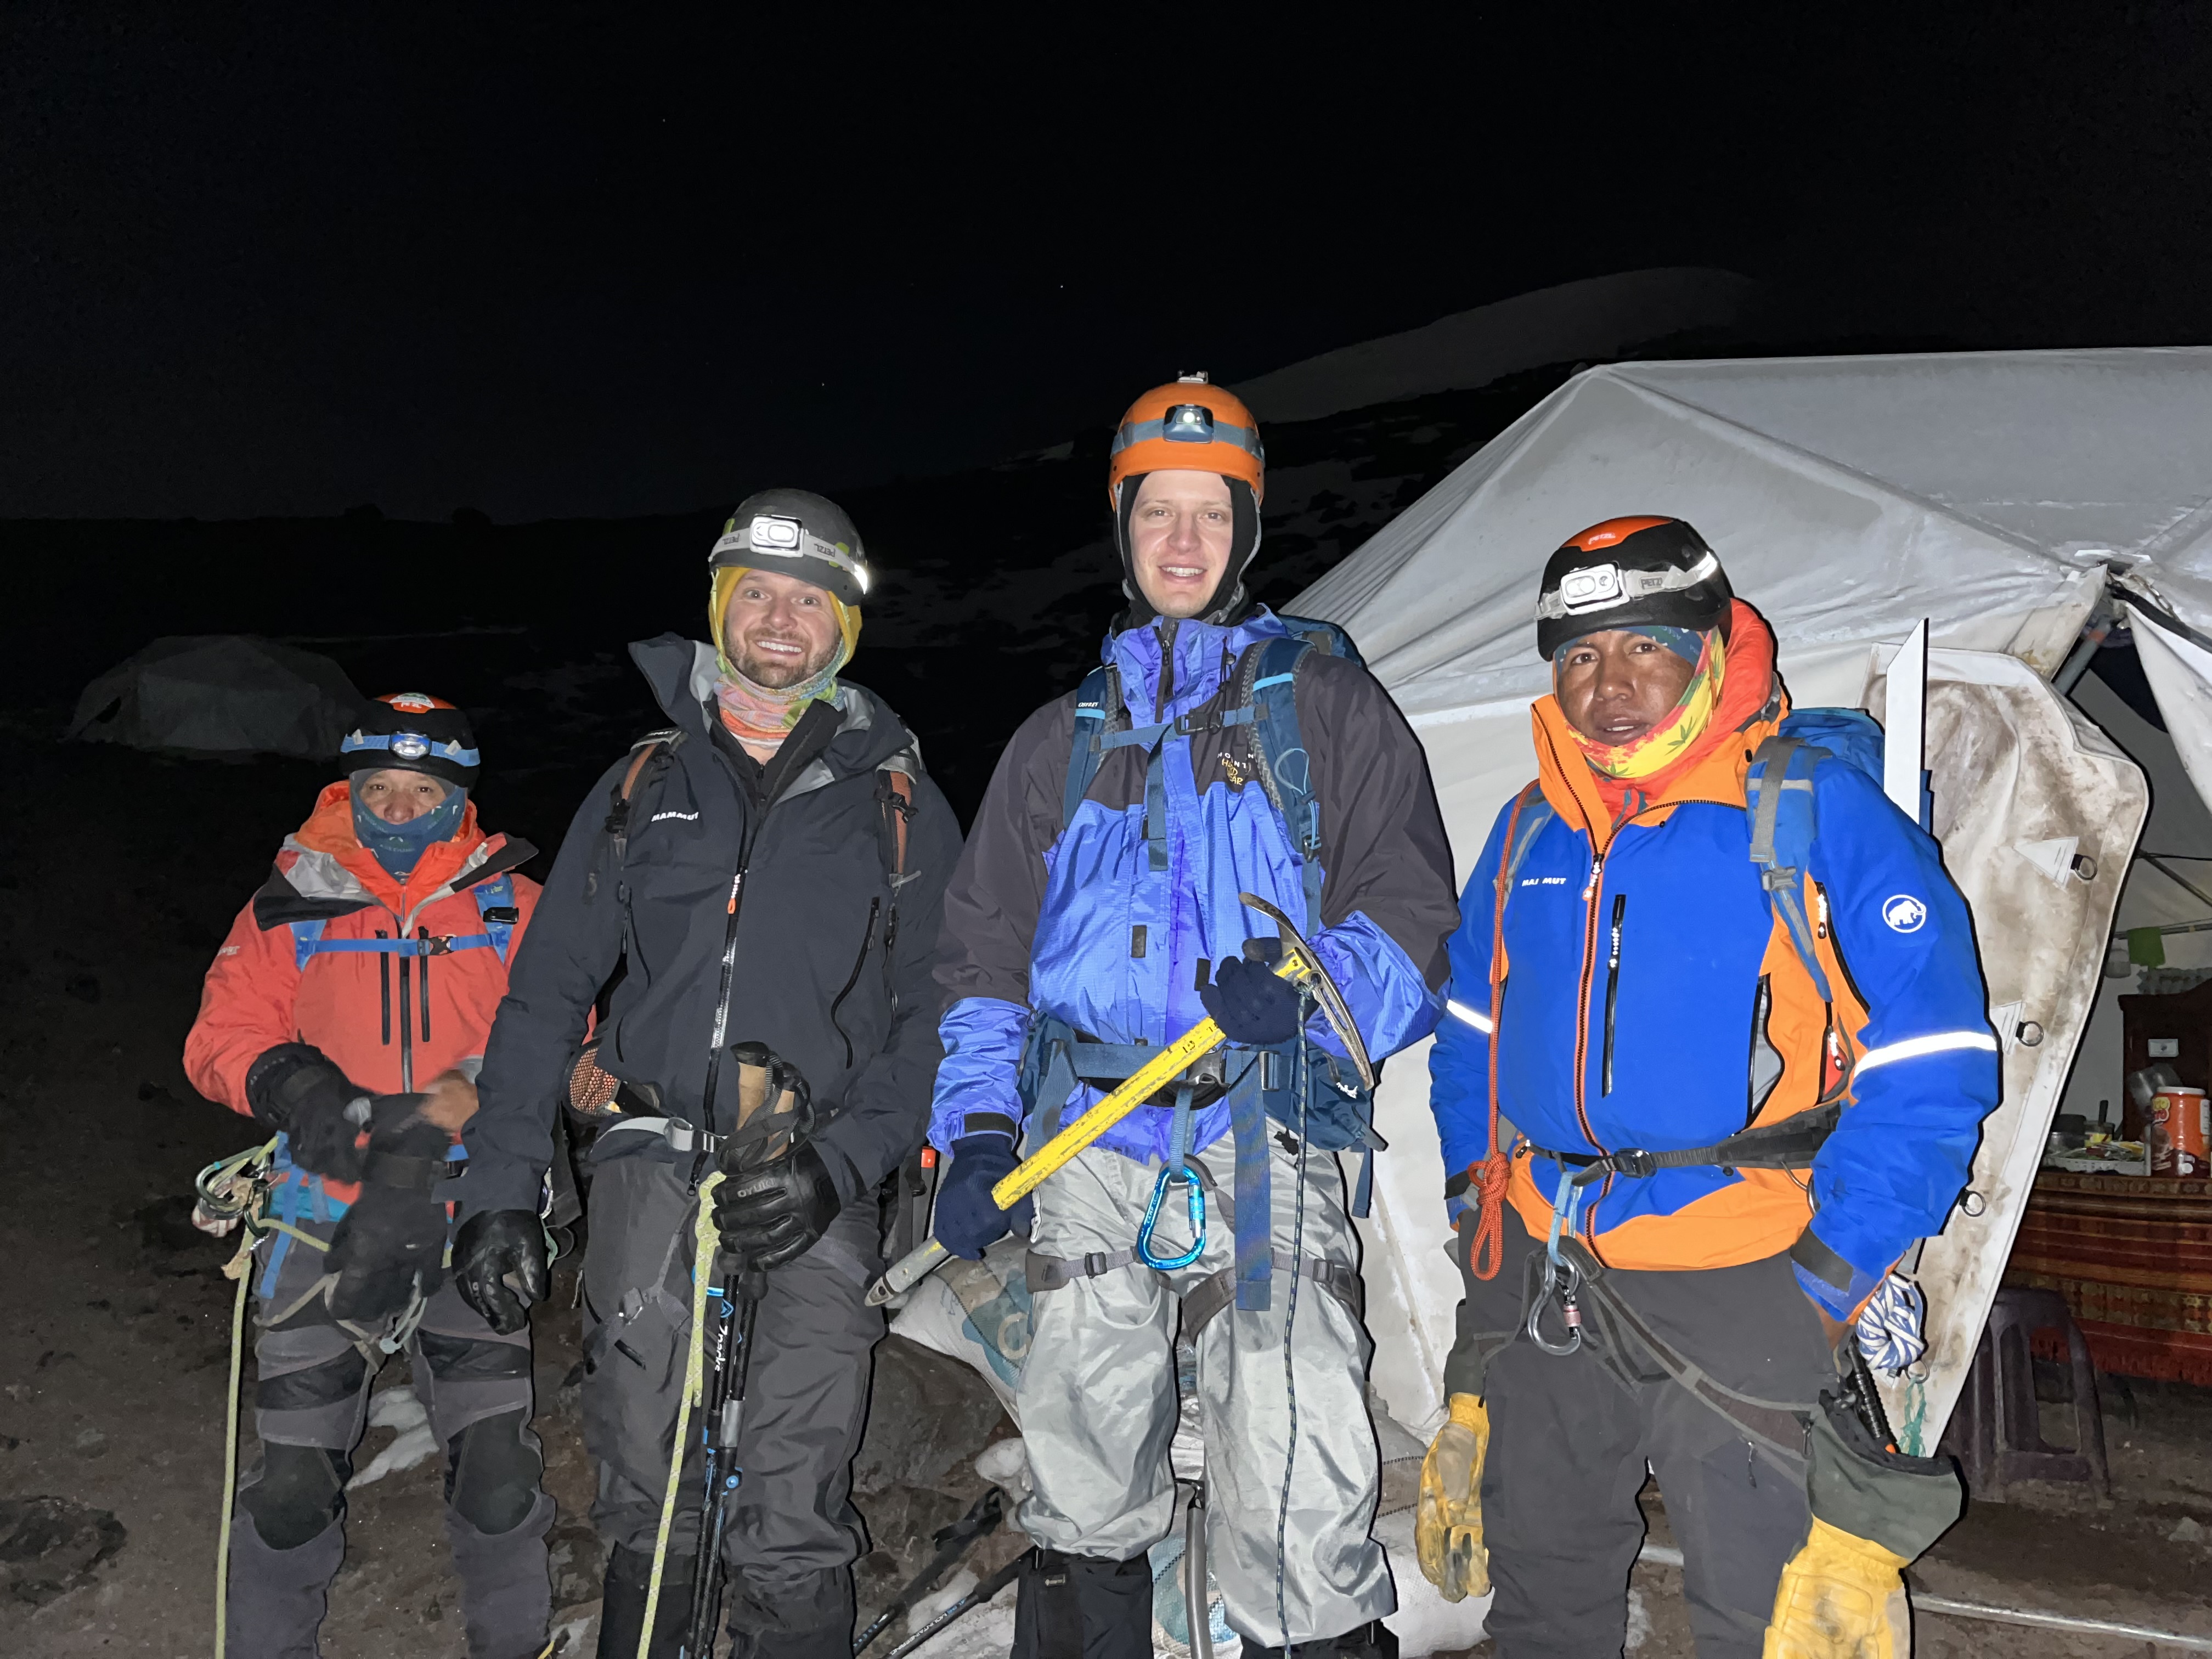 We left the high camp (5300m) at 12:10am to push for the summit in great spirits